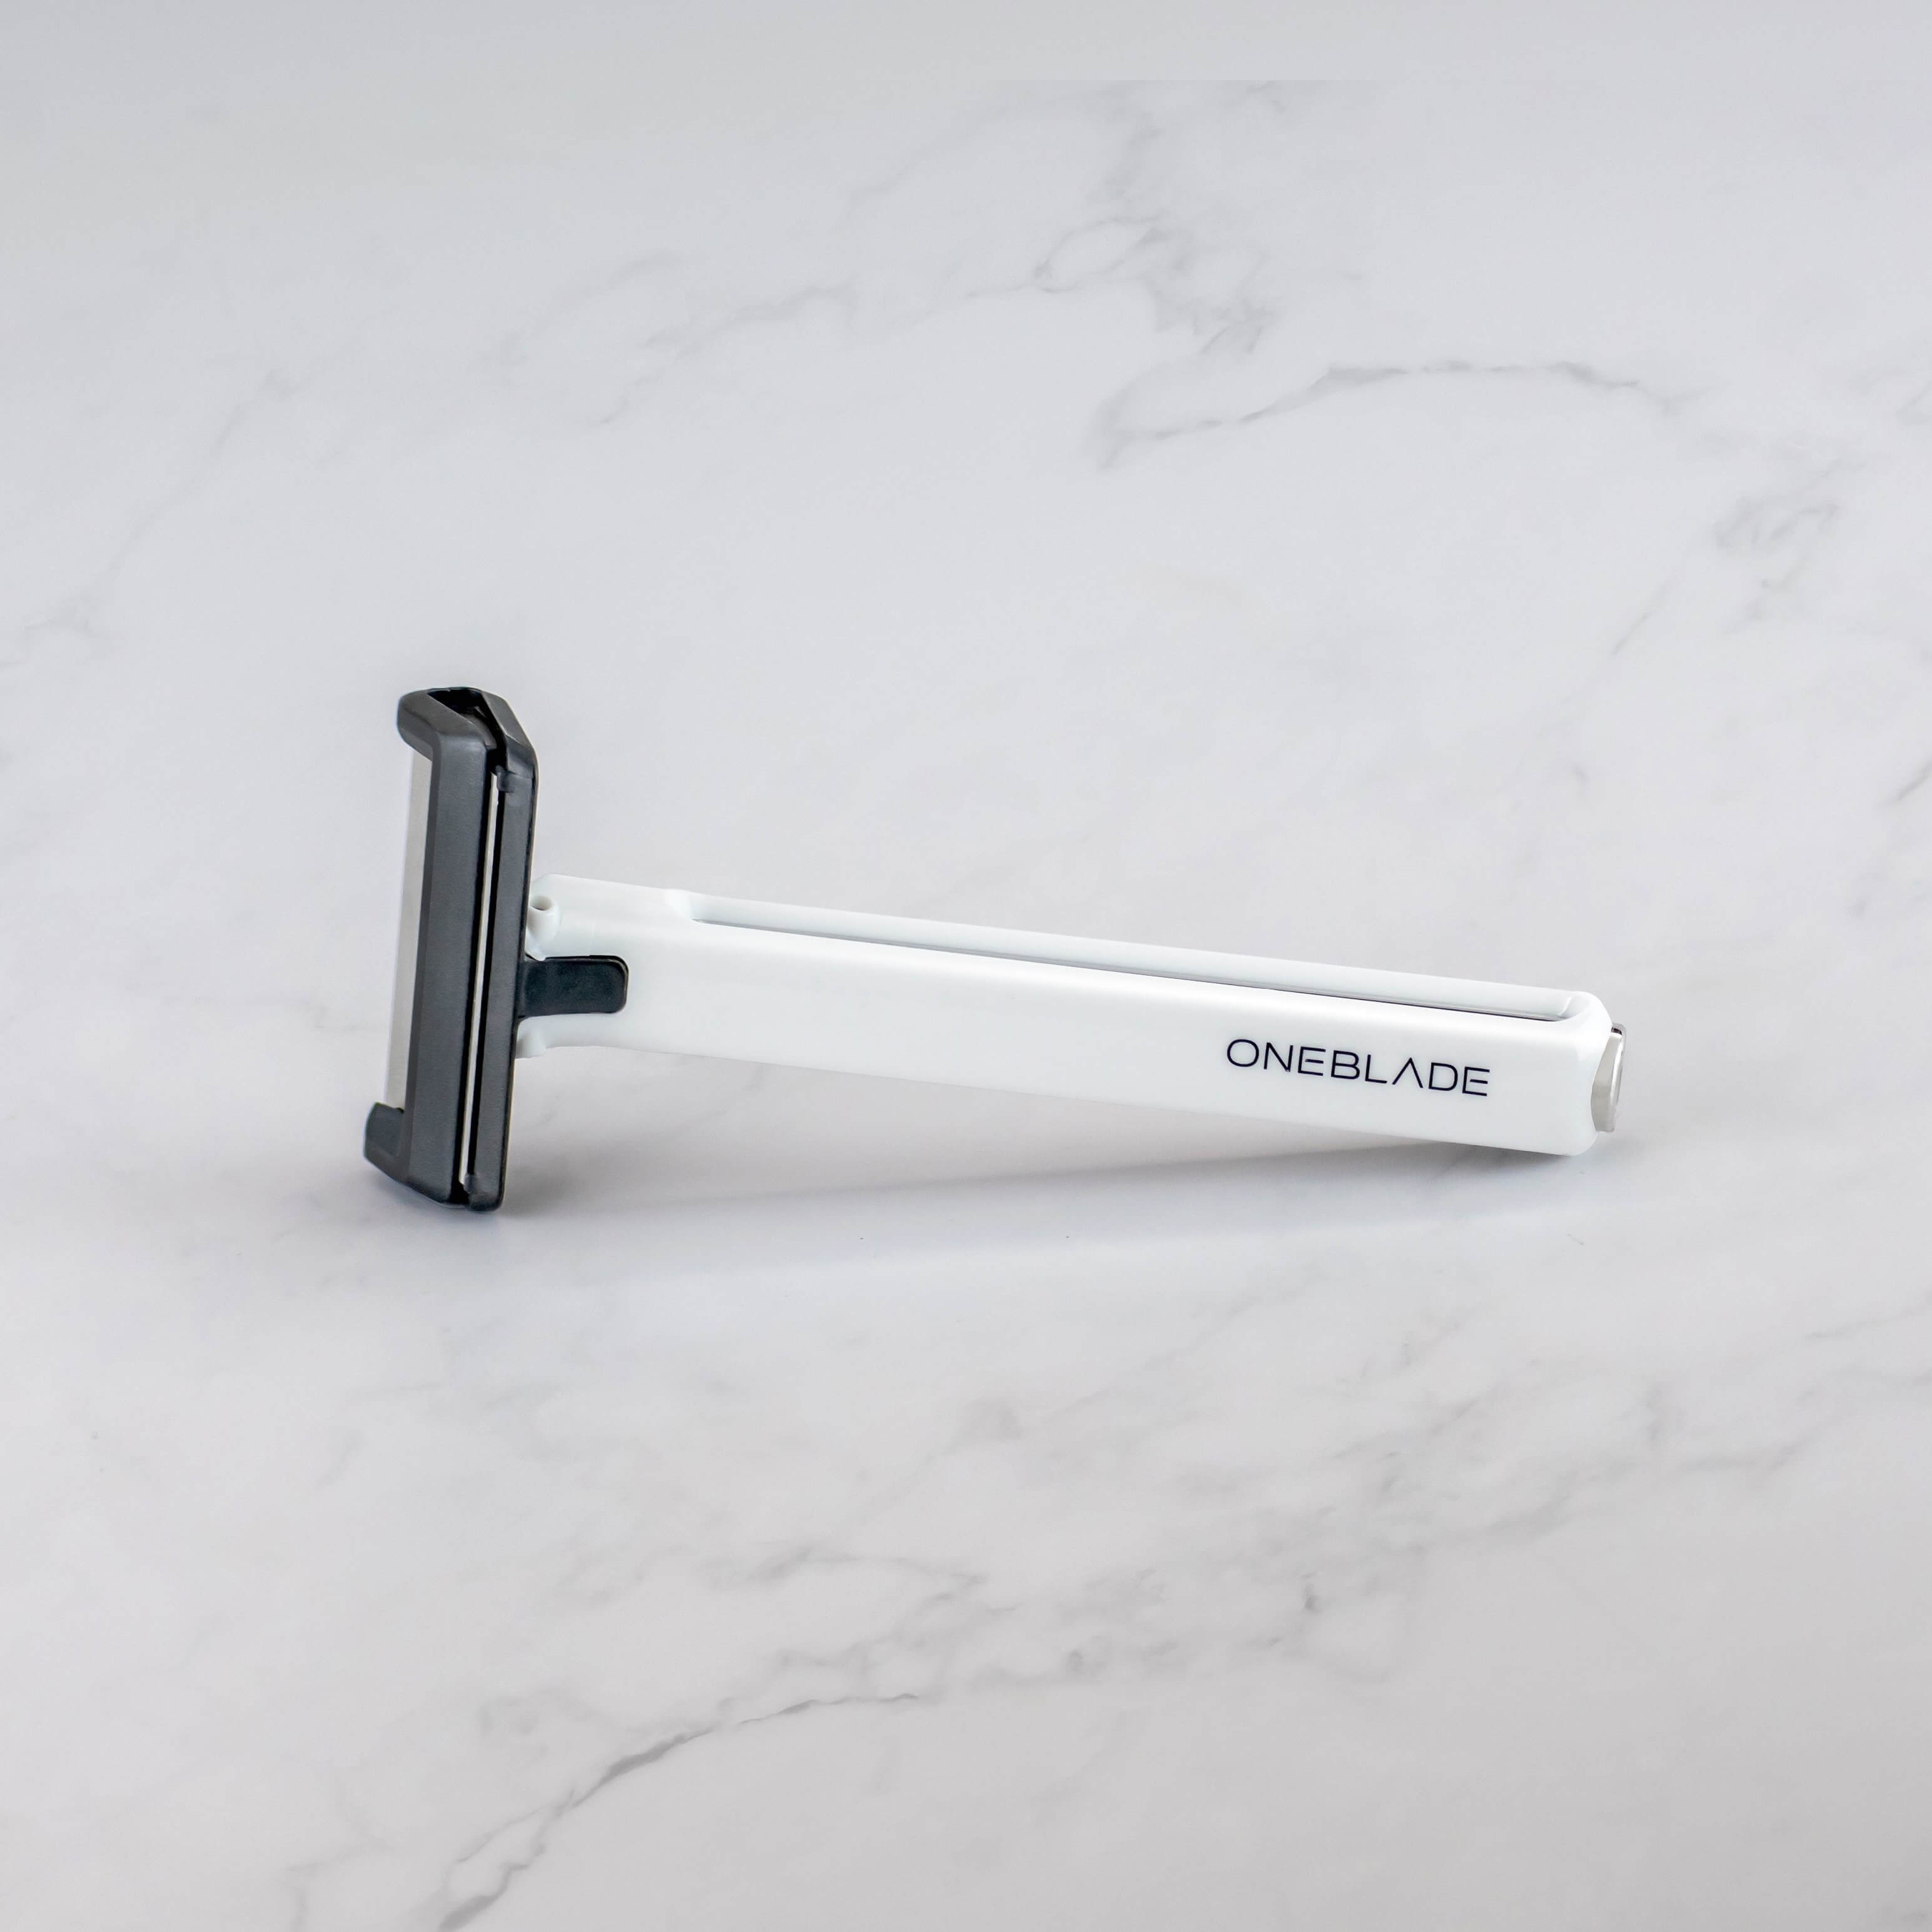 A white Core single blade safety razor on marble surface